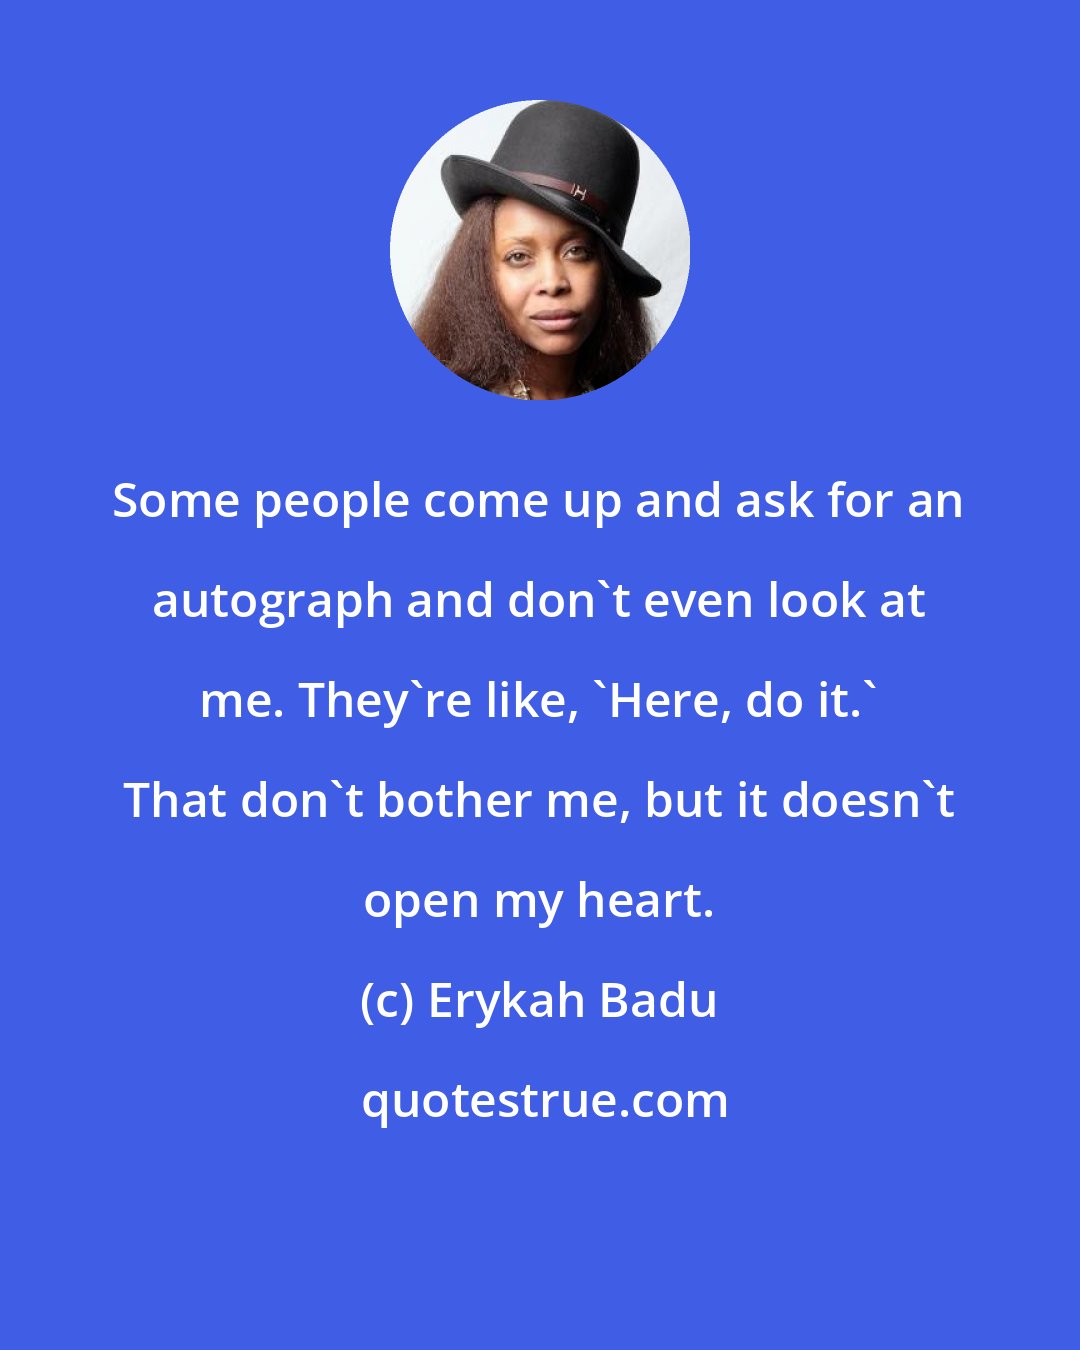 Erykah Badu: Some people come up and ask for an autograph and don't even look at me. They're like, 'Here, do it.' That don't bother me, but it doesn't open my heart.